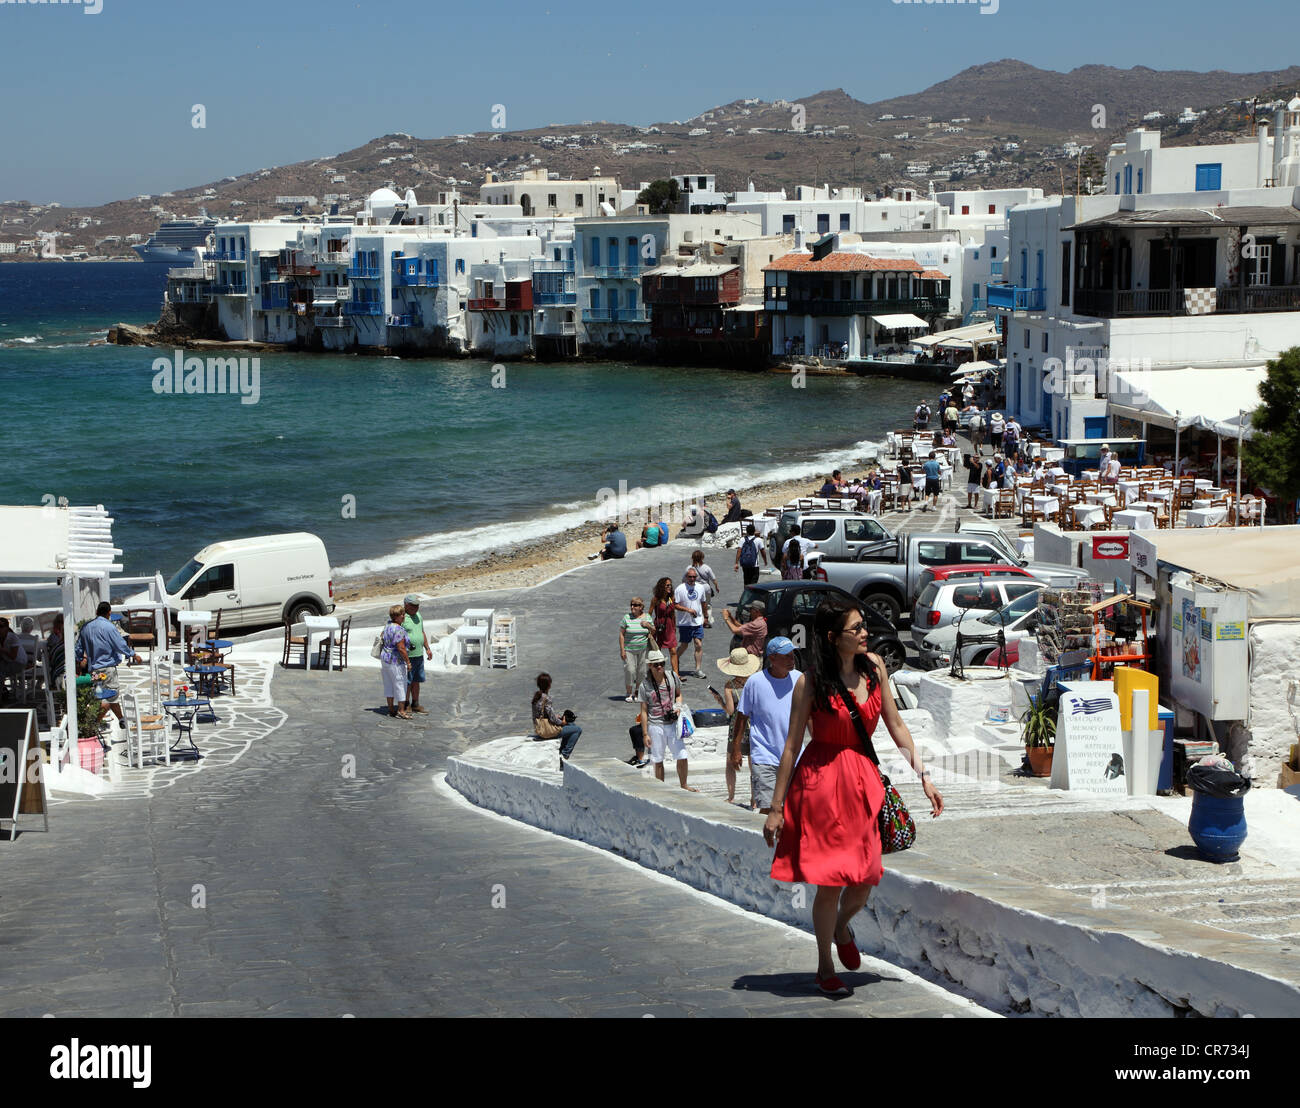 The waterfront, Mykonos, one of the Cyclades Islands, Aegean Sea, Greece Stock Photo